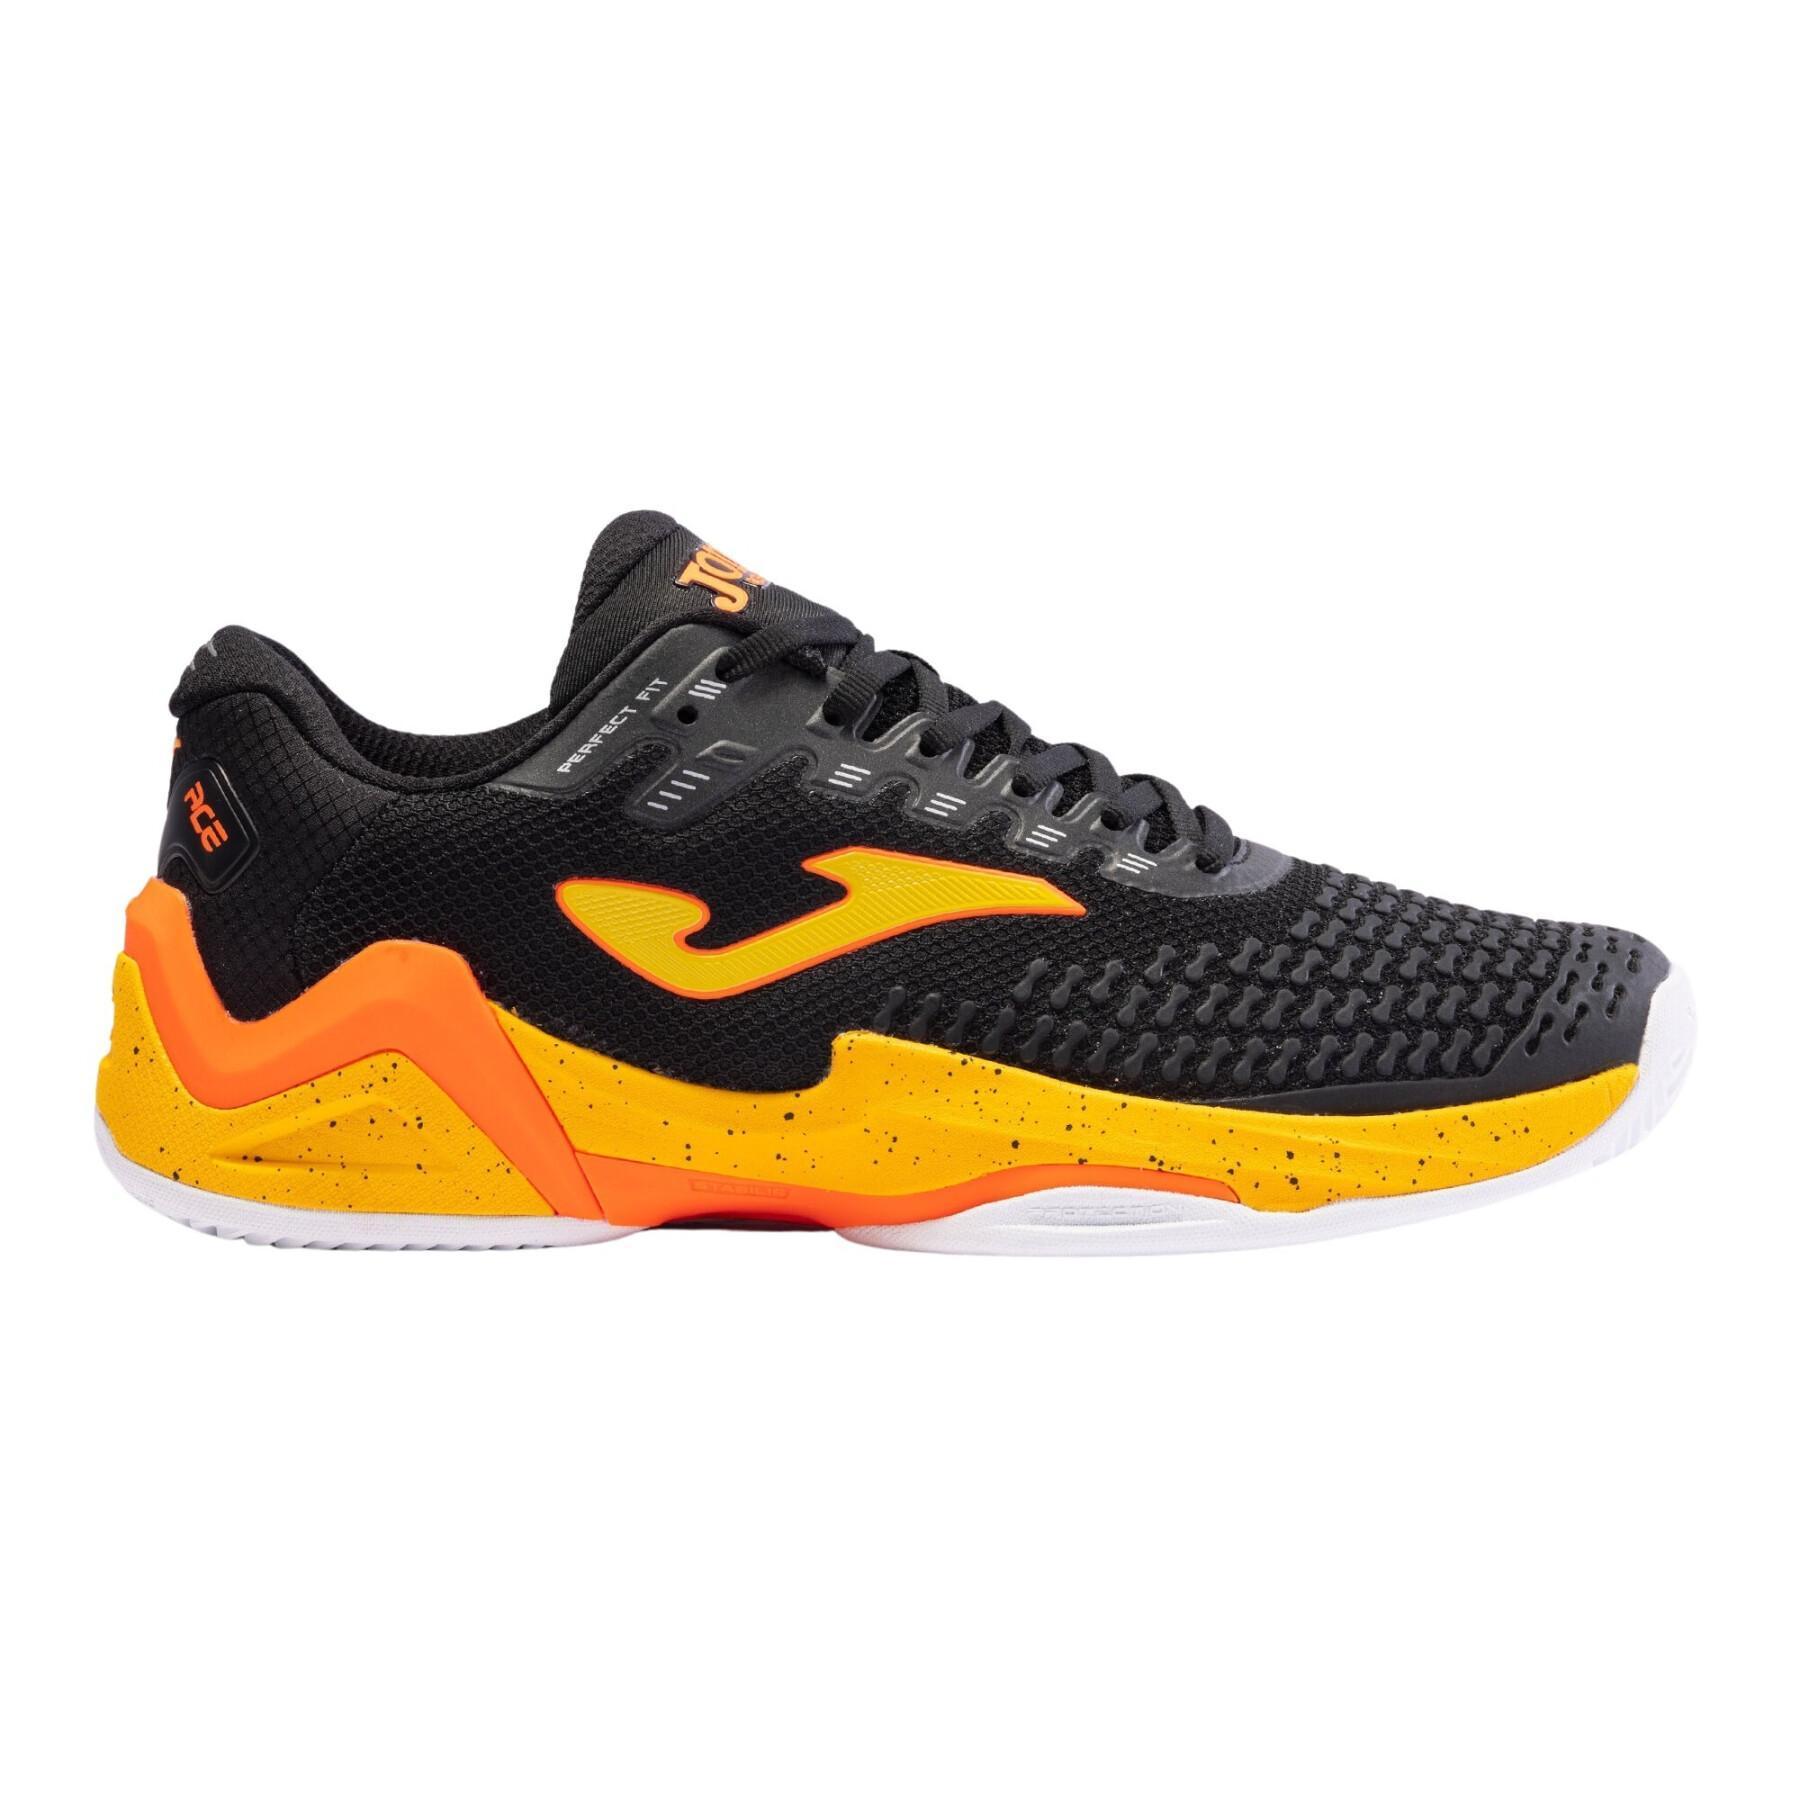 Padel shoes Joma T.Ace 2301